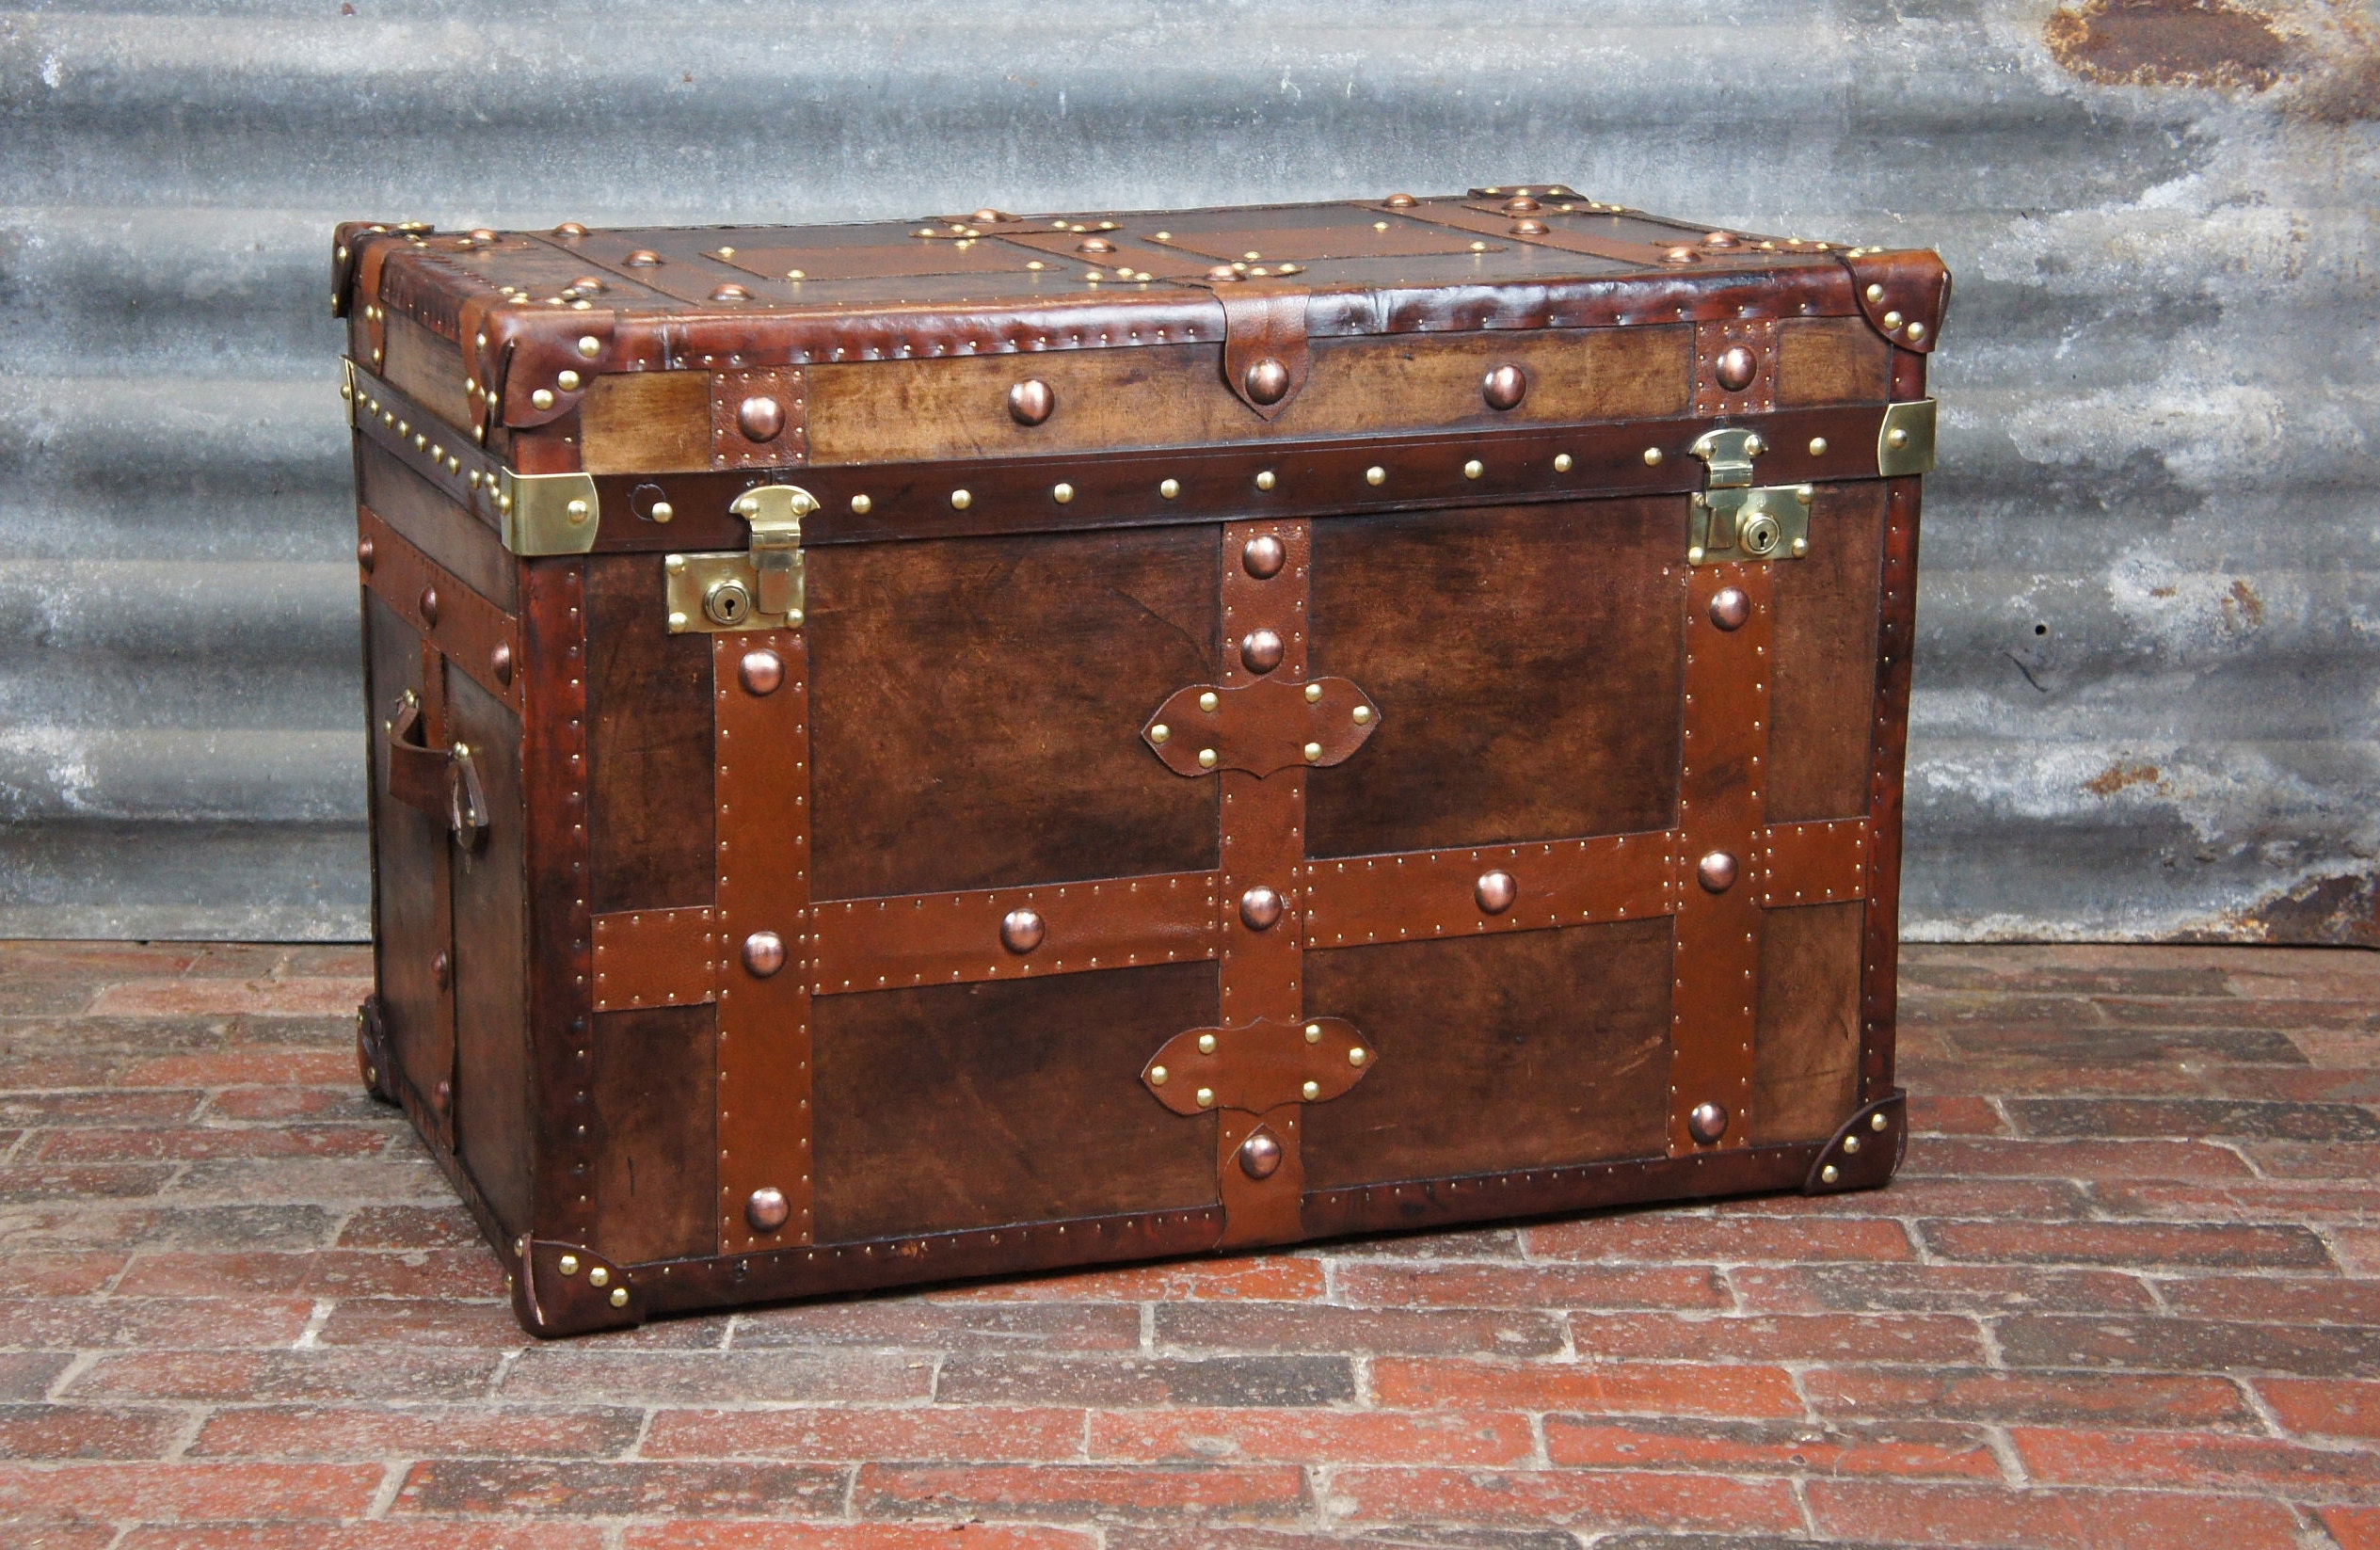 Antique Handmade English Tan Leather Coffee Chest Coffee Table Trunk Box TR